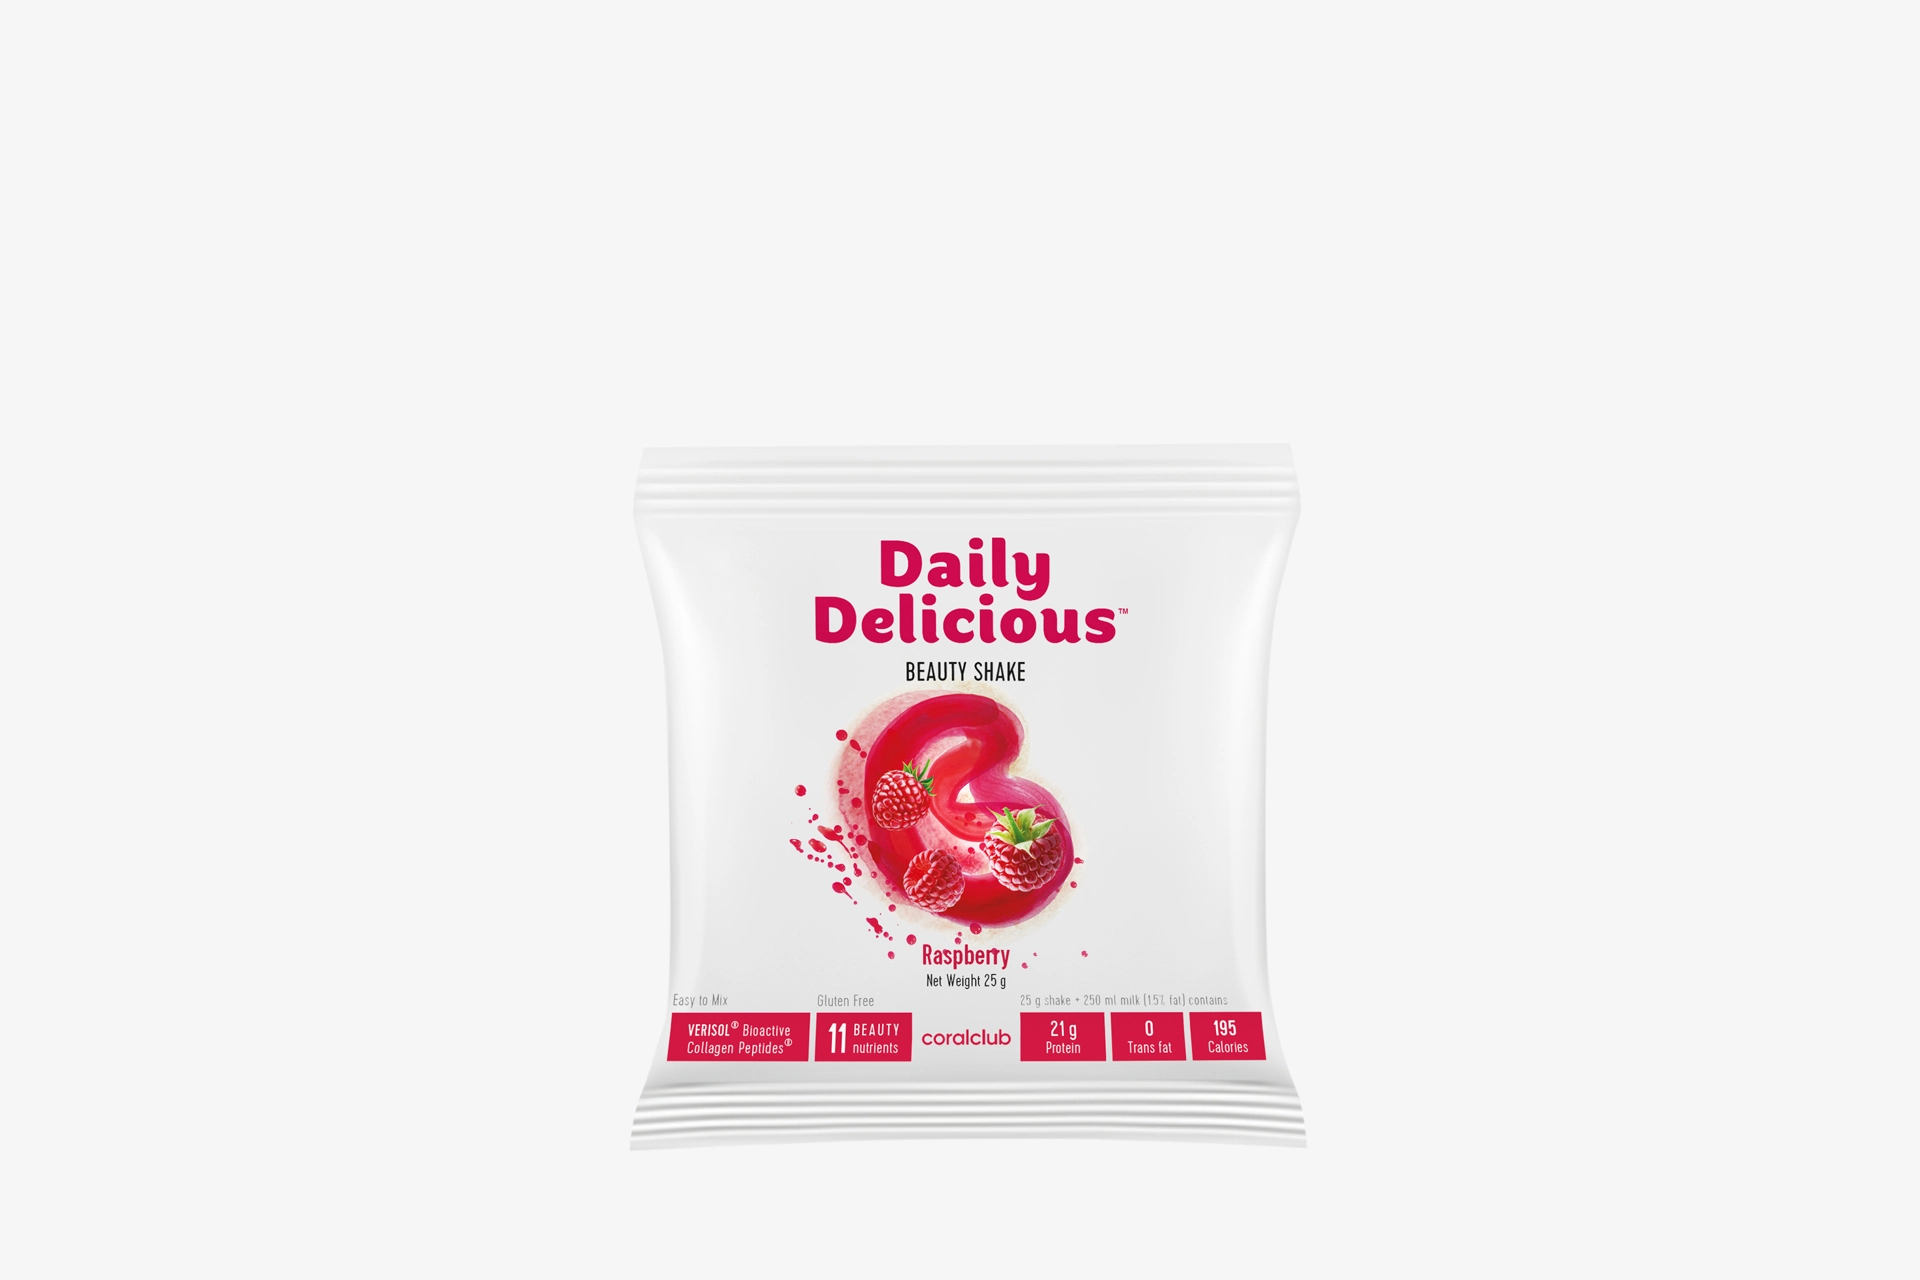 Daily Delicious Beauty Shake Raspberry